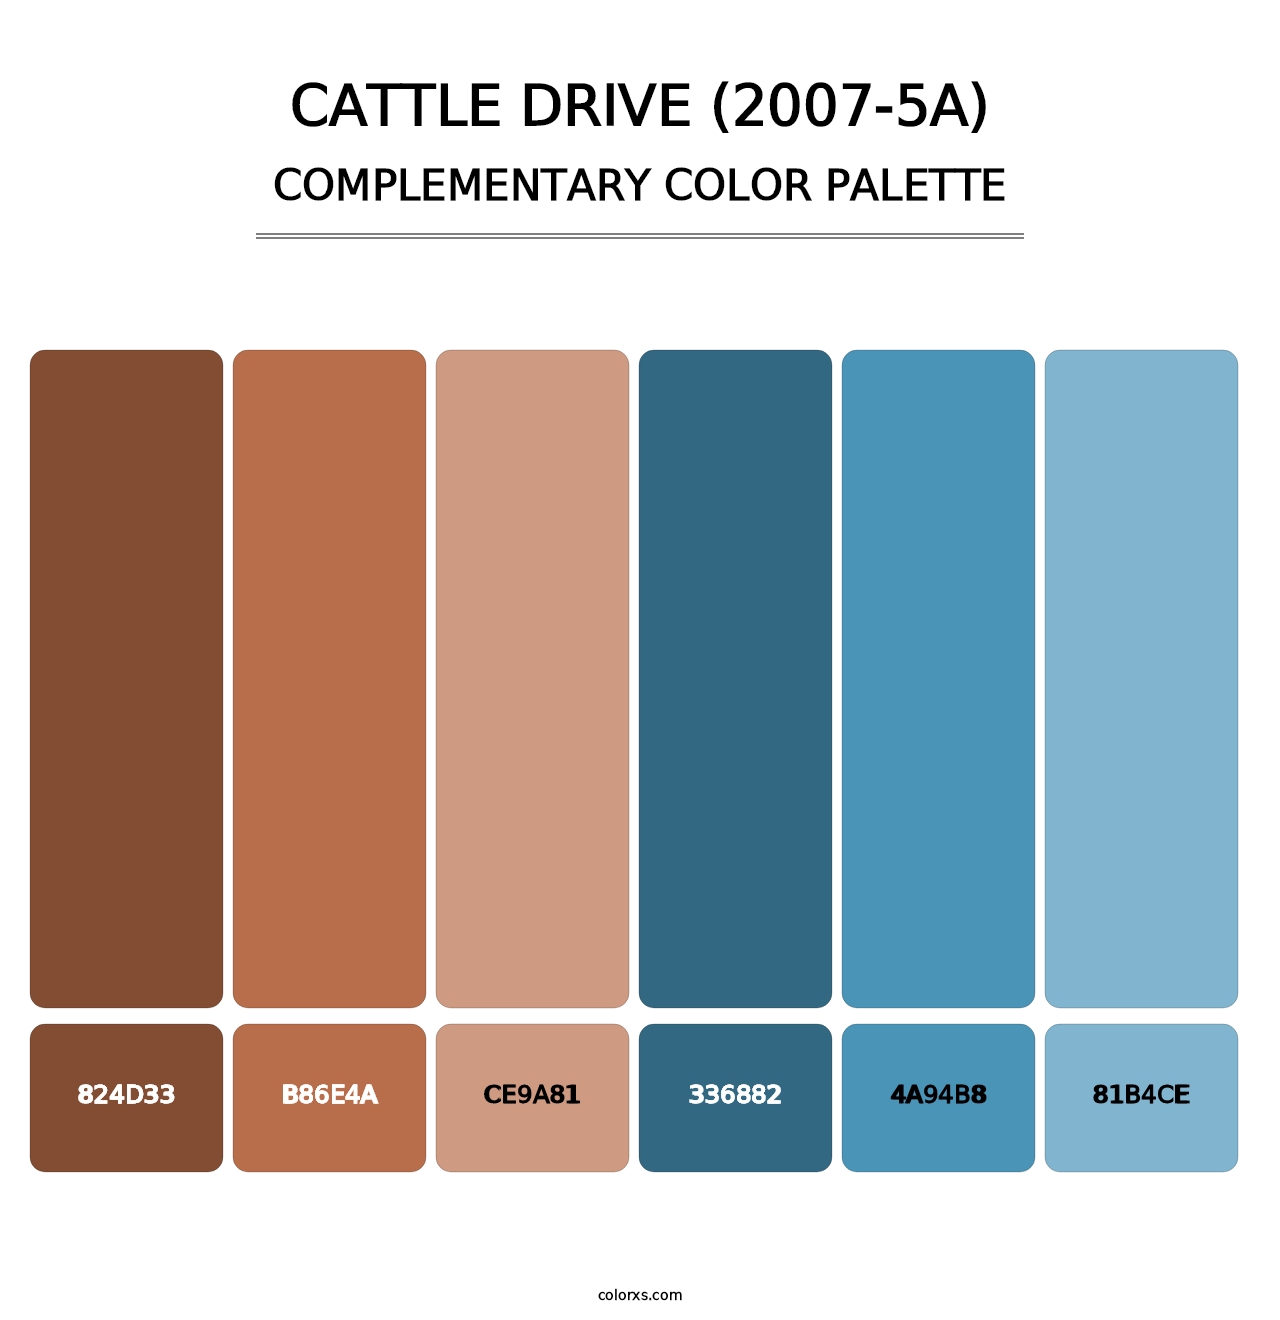 Cattle Drive (2007-5A) - Complementary Color Palette